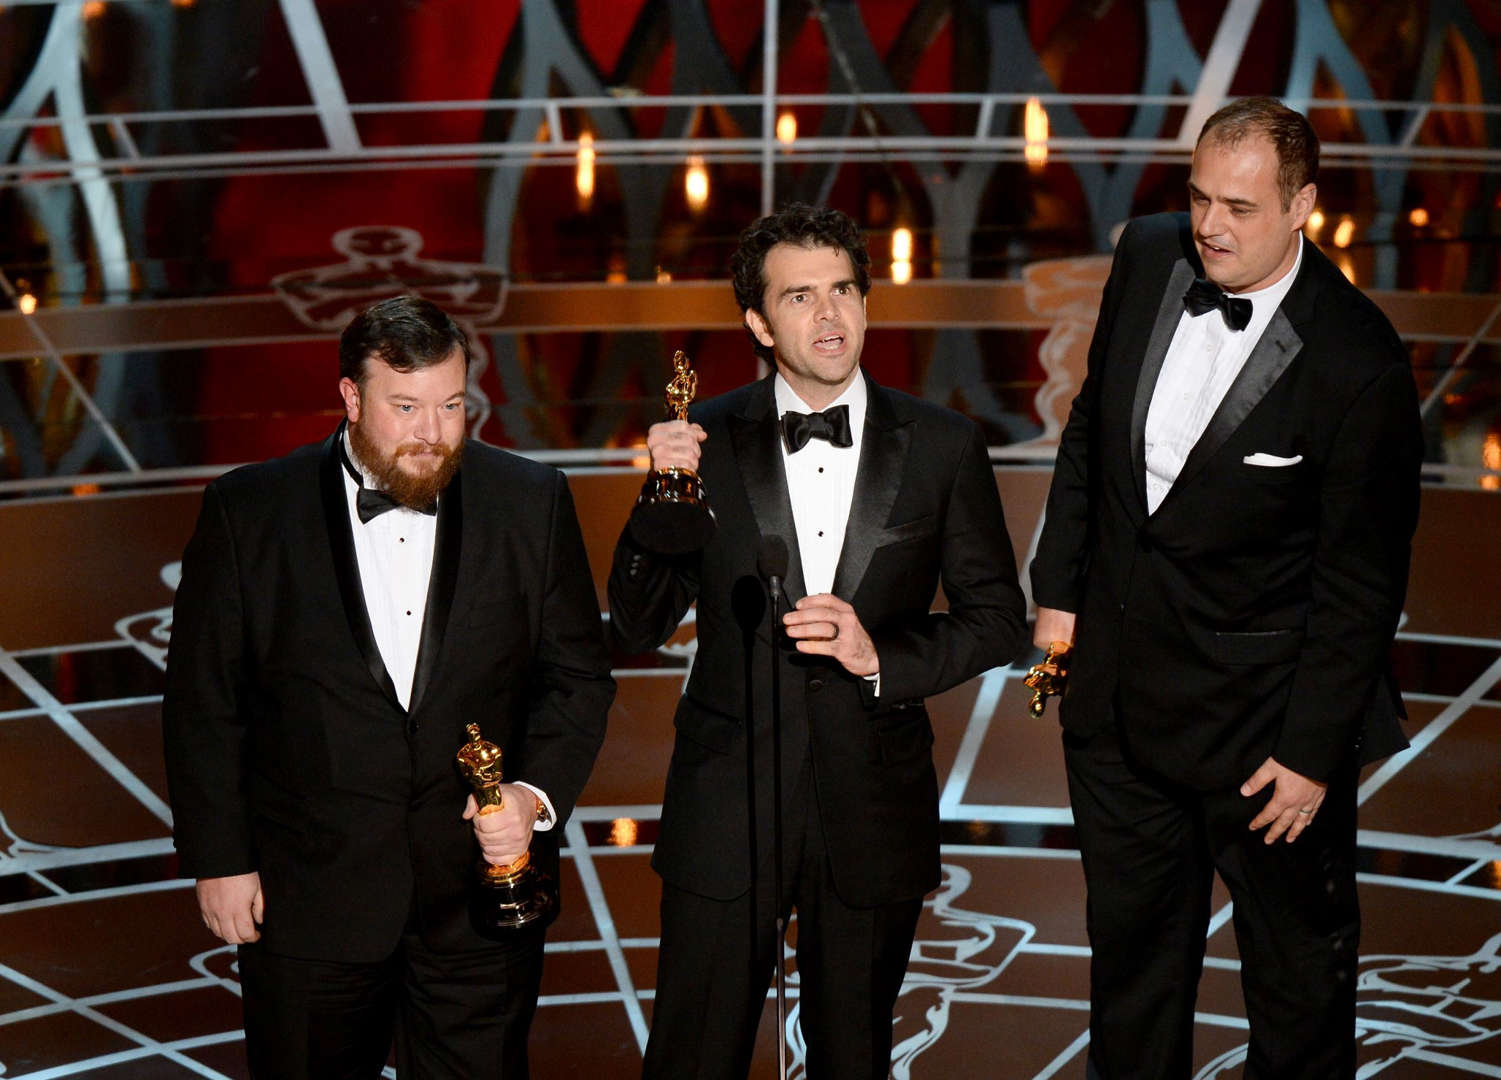 Winners for Best Sound Mixing "Whiplash" Craig Mann, Ben Wilkins and Thomas Curley give their acceptance speech on stage at the 87th Oscars February 22, 2015 in Hollywood, California. AFP PHOTO / Robyn BECK        (Photo credit should read ROBYN BECK/AFP/Getty Images)